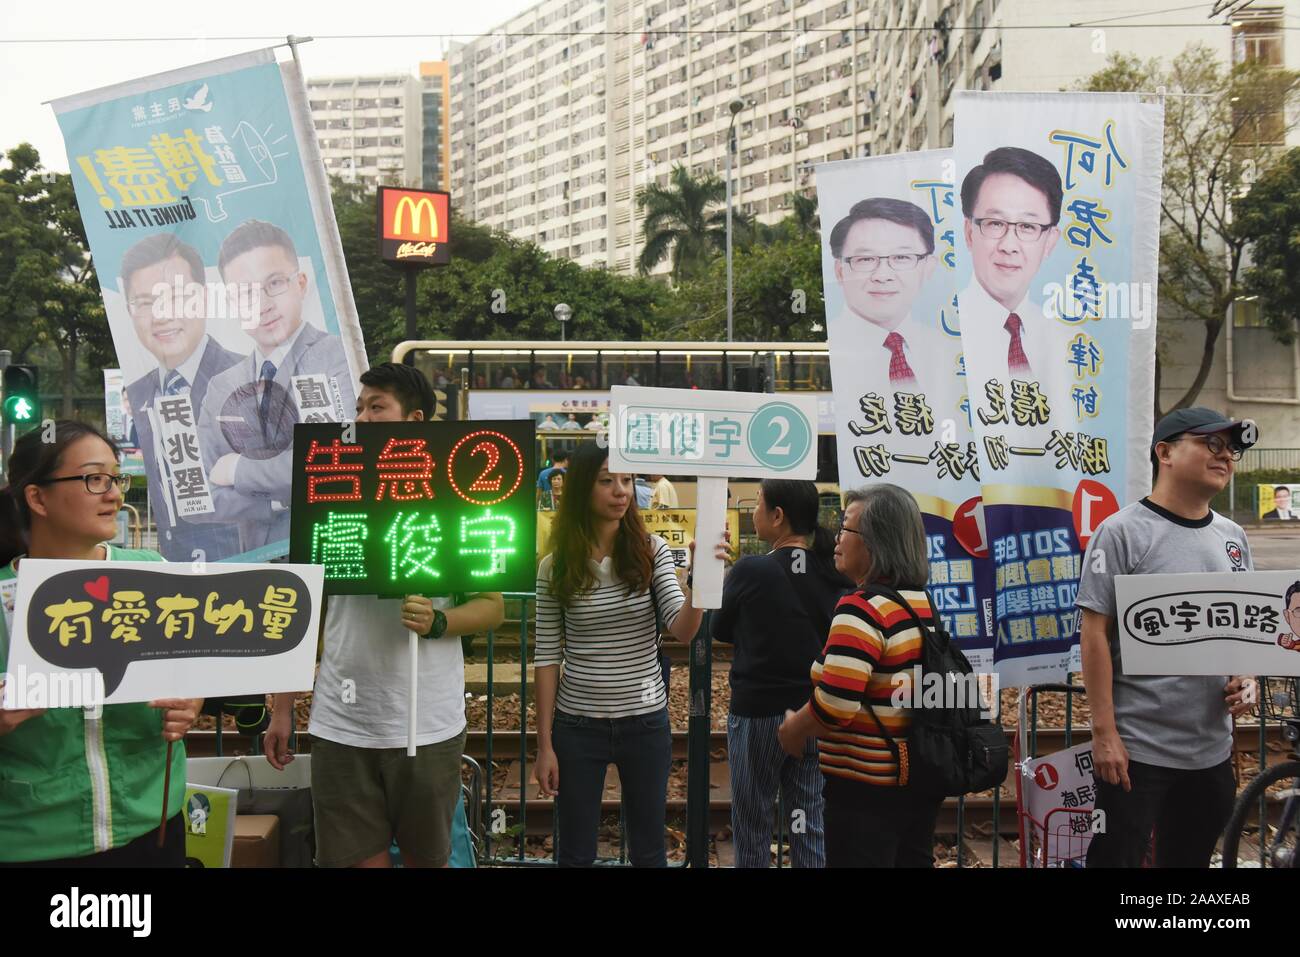 Volunteers campaign on a street ahead of District Council Elections.Hong Kong held its district council election under a rare atmosphere of calm and peace after weeks of intense clashes at numerous universities between anti-government protesters and police which continue into its sixth month of demonstrations. Stock Photo